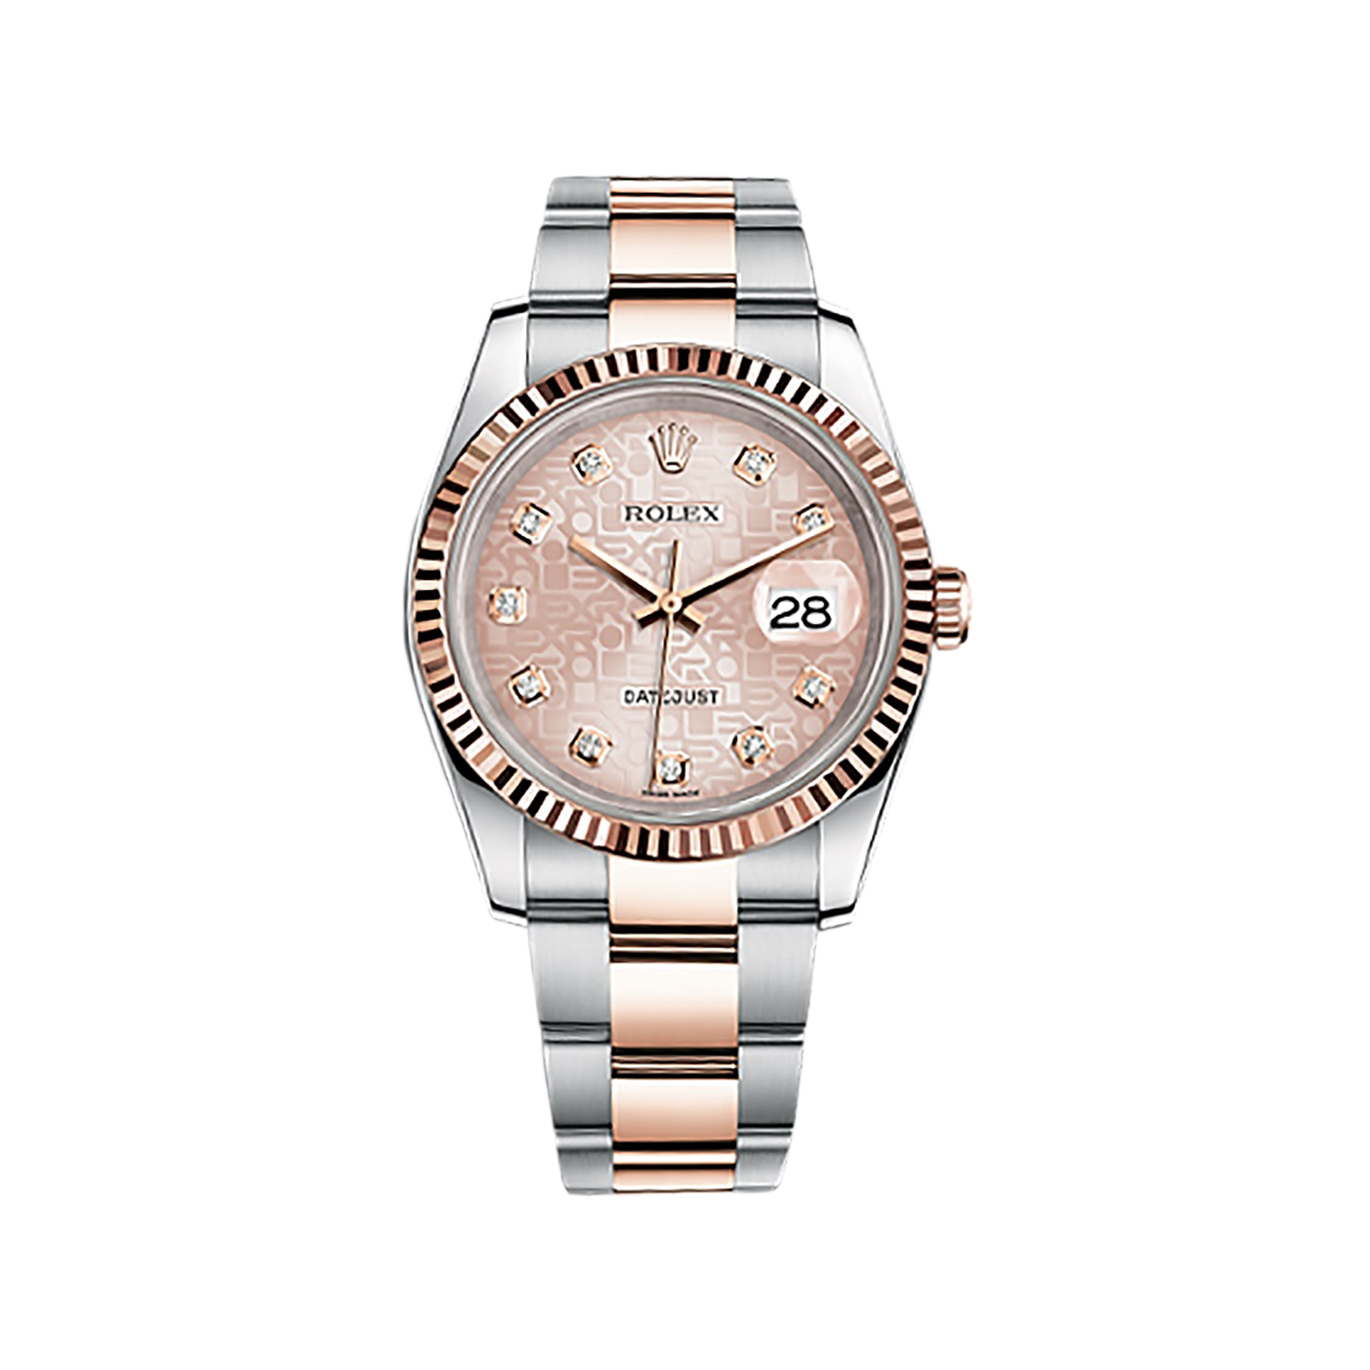 Datejust 36 116231 Rose Gold & Stainless Steel Watch (Pink Jubilee Design Set with Diamonds)